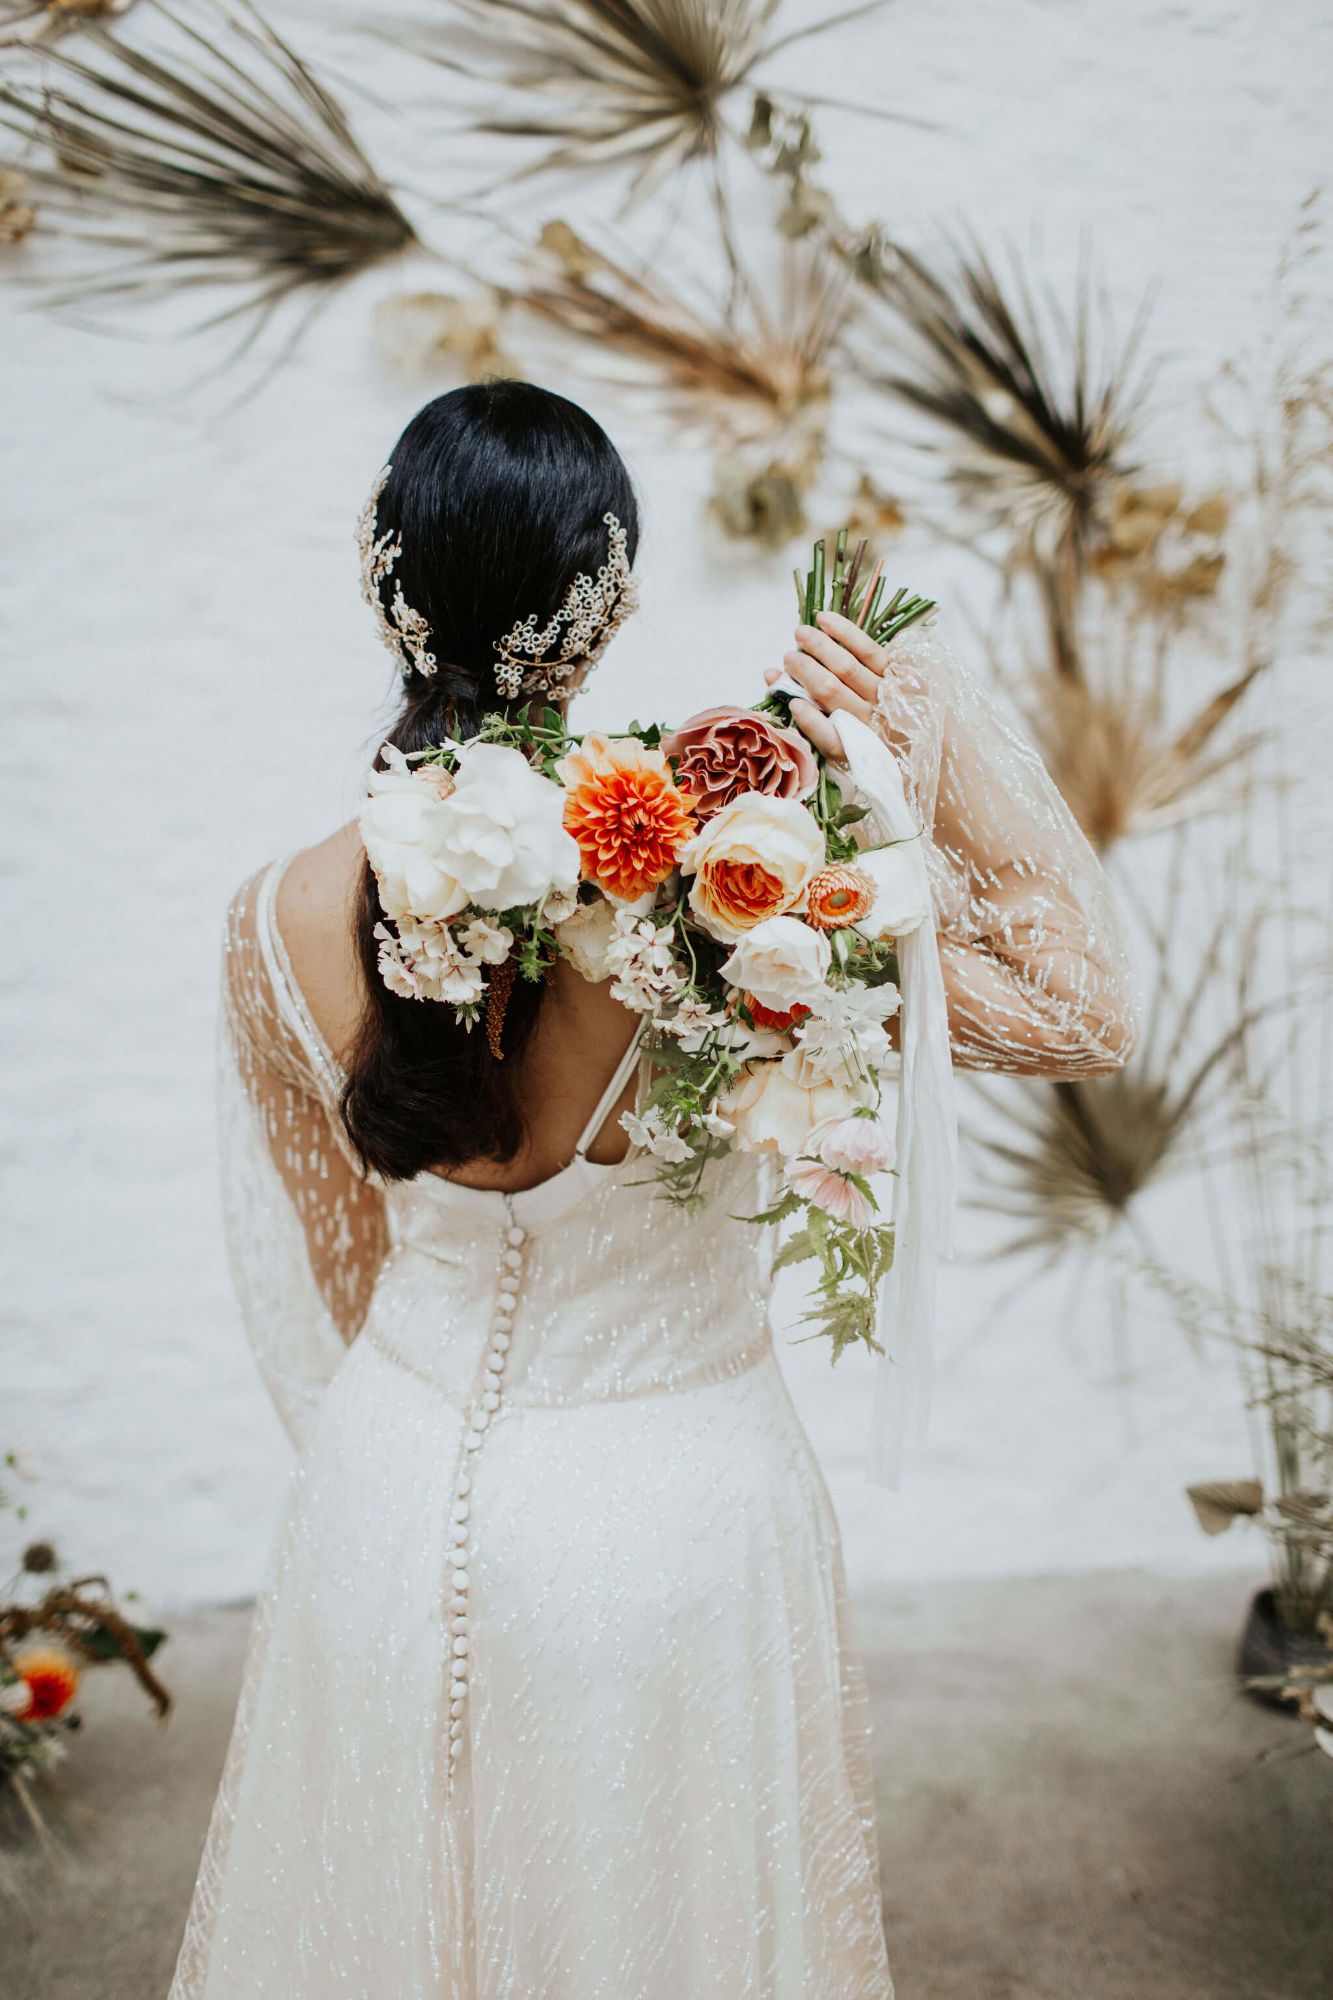 A model stands with her back to us. She has a bouquet of ivory and coral flowers over her shoulder, she is wearing a Rachel Burgess Bridal Boutique wedding gown of gold glittery lace and is wearing a delicately beaded bridal headpiece made by Clare Lloyd Accessories